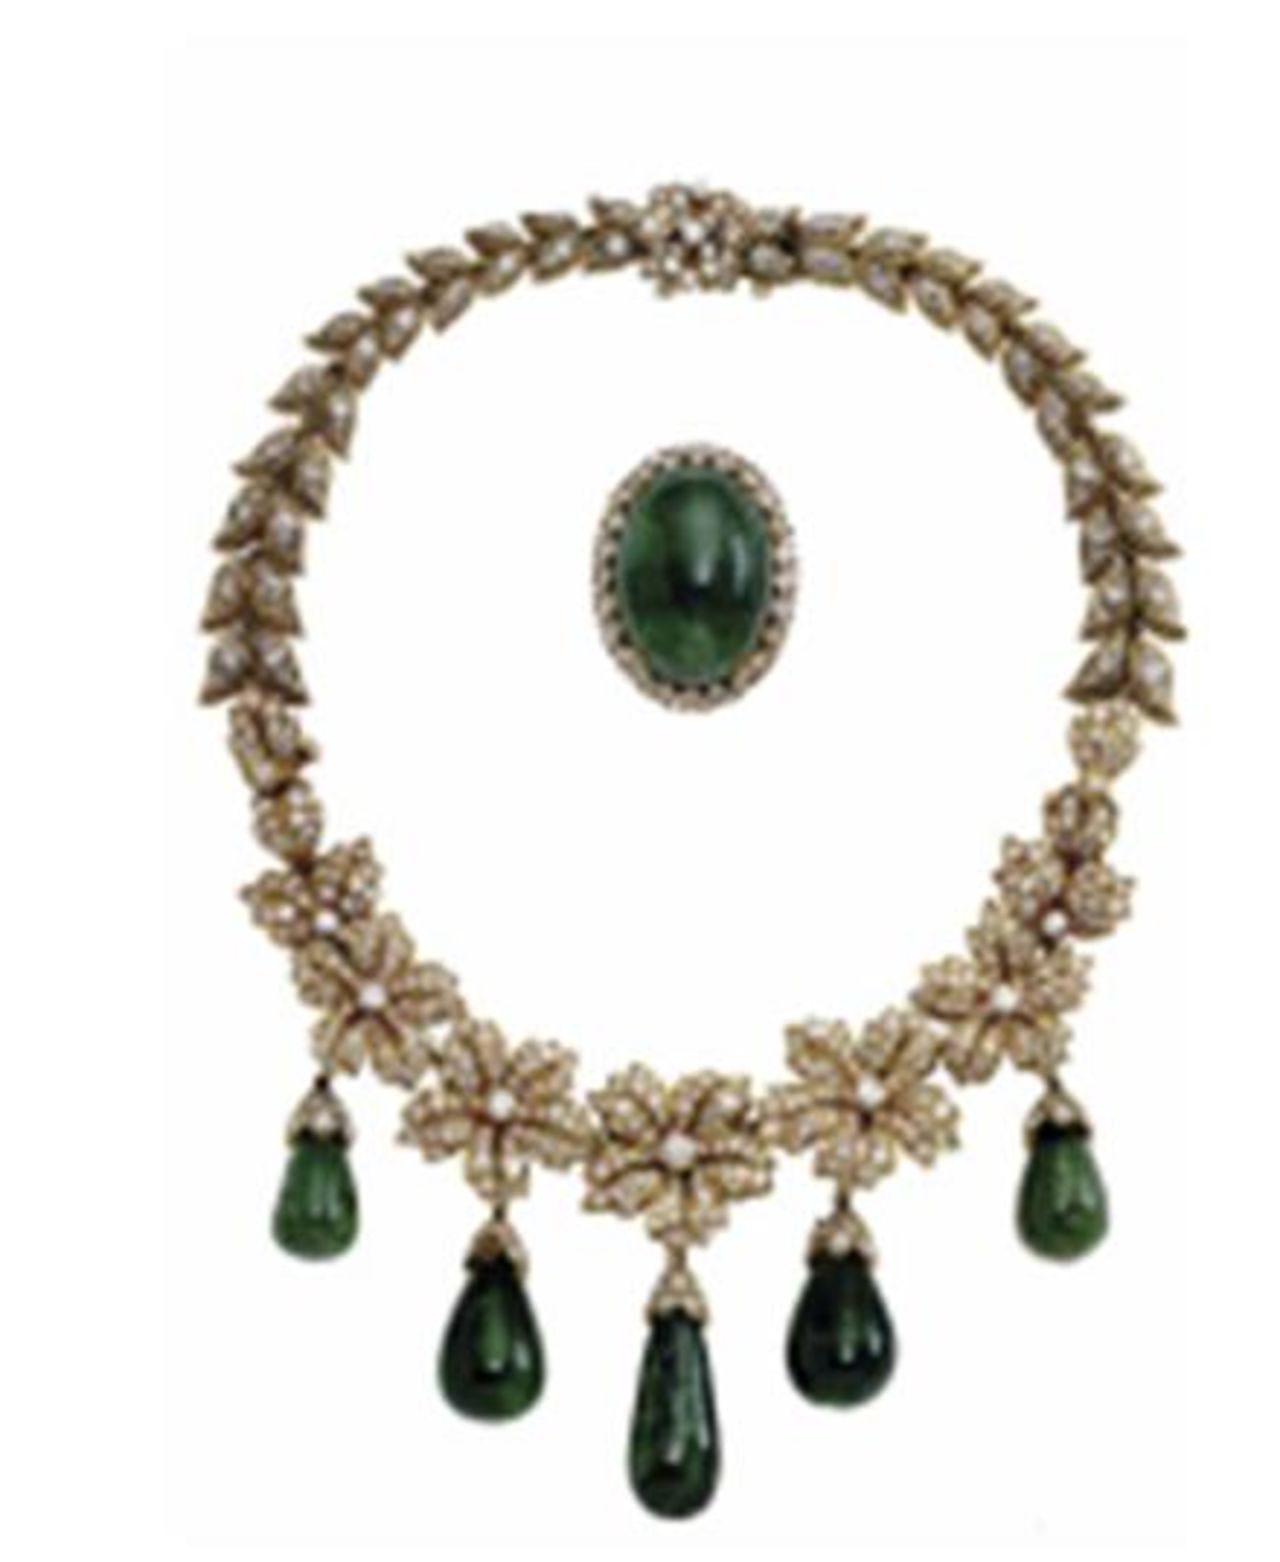 Jacqueline Onassis' Van Cleef & Arpels necklace and brooch. Much of the emerald's allure comes from its color - in normal lighting the human eye responds most strongly to yellowish-green light. 